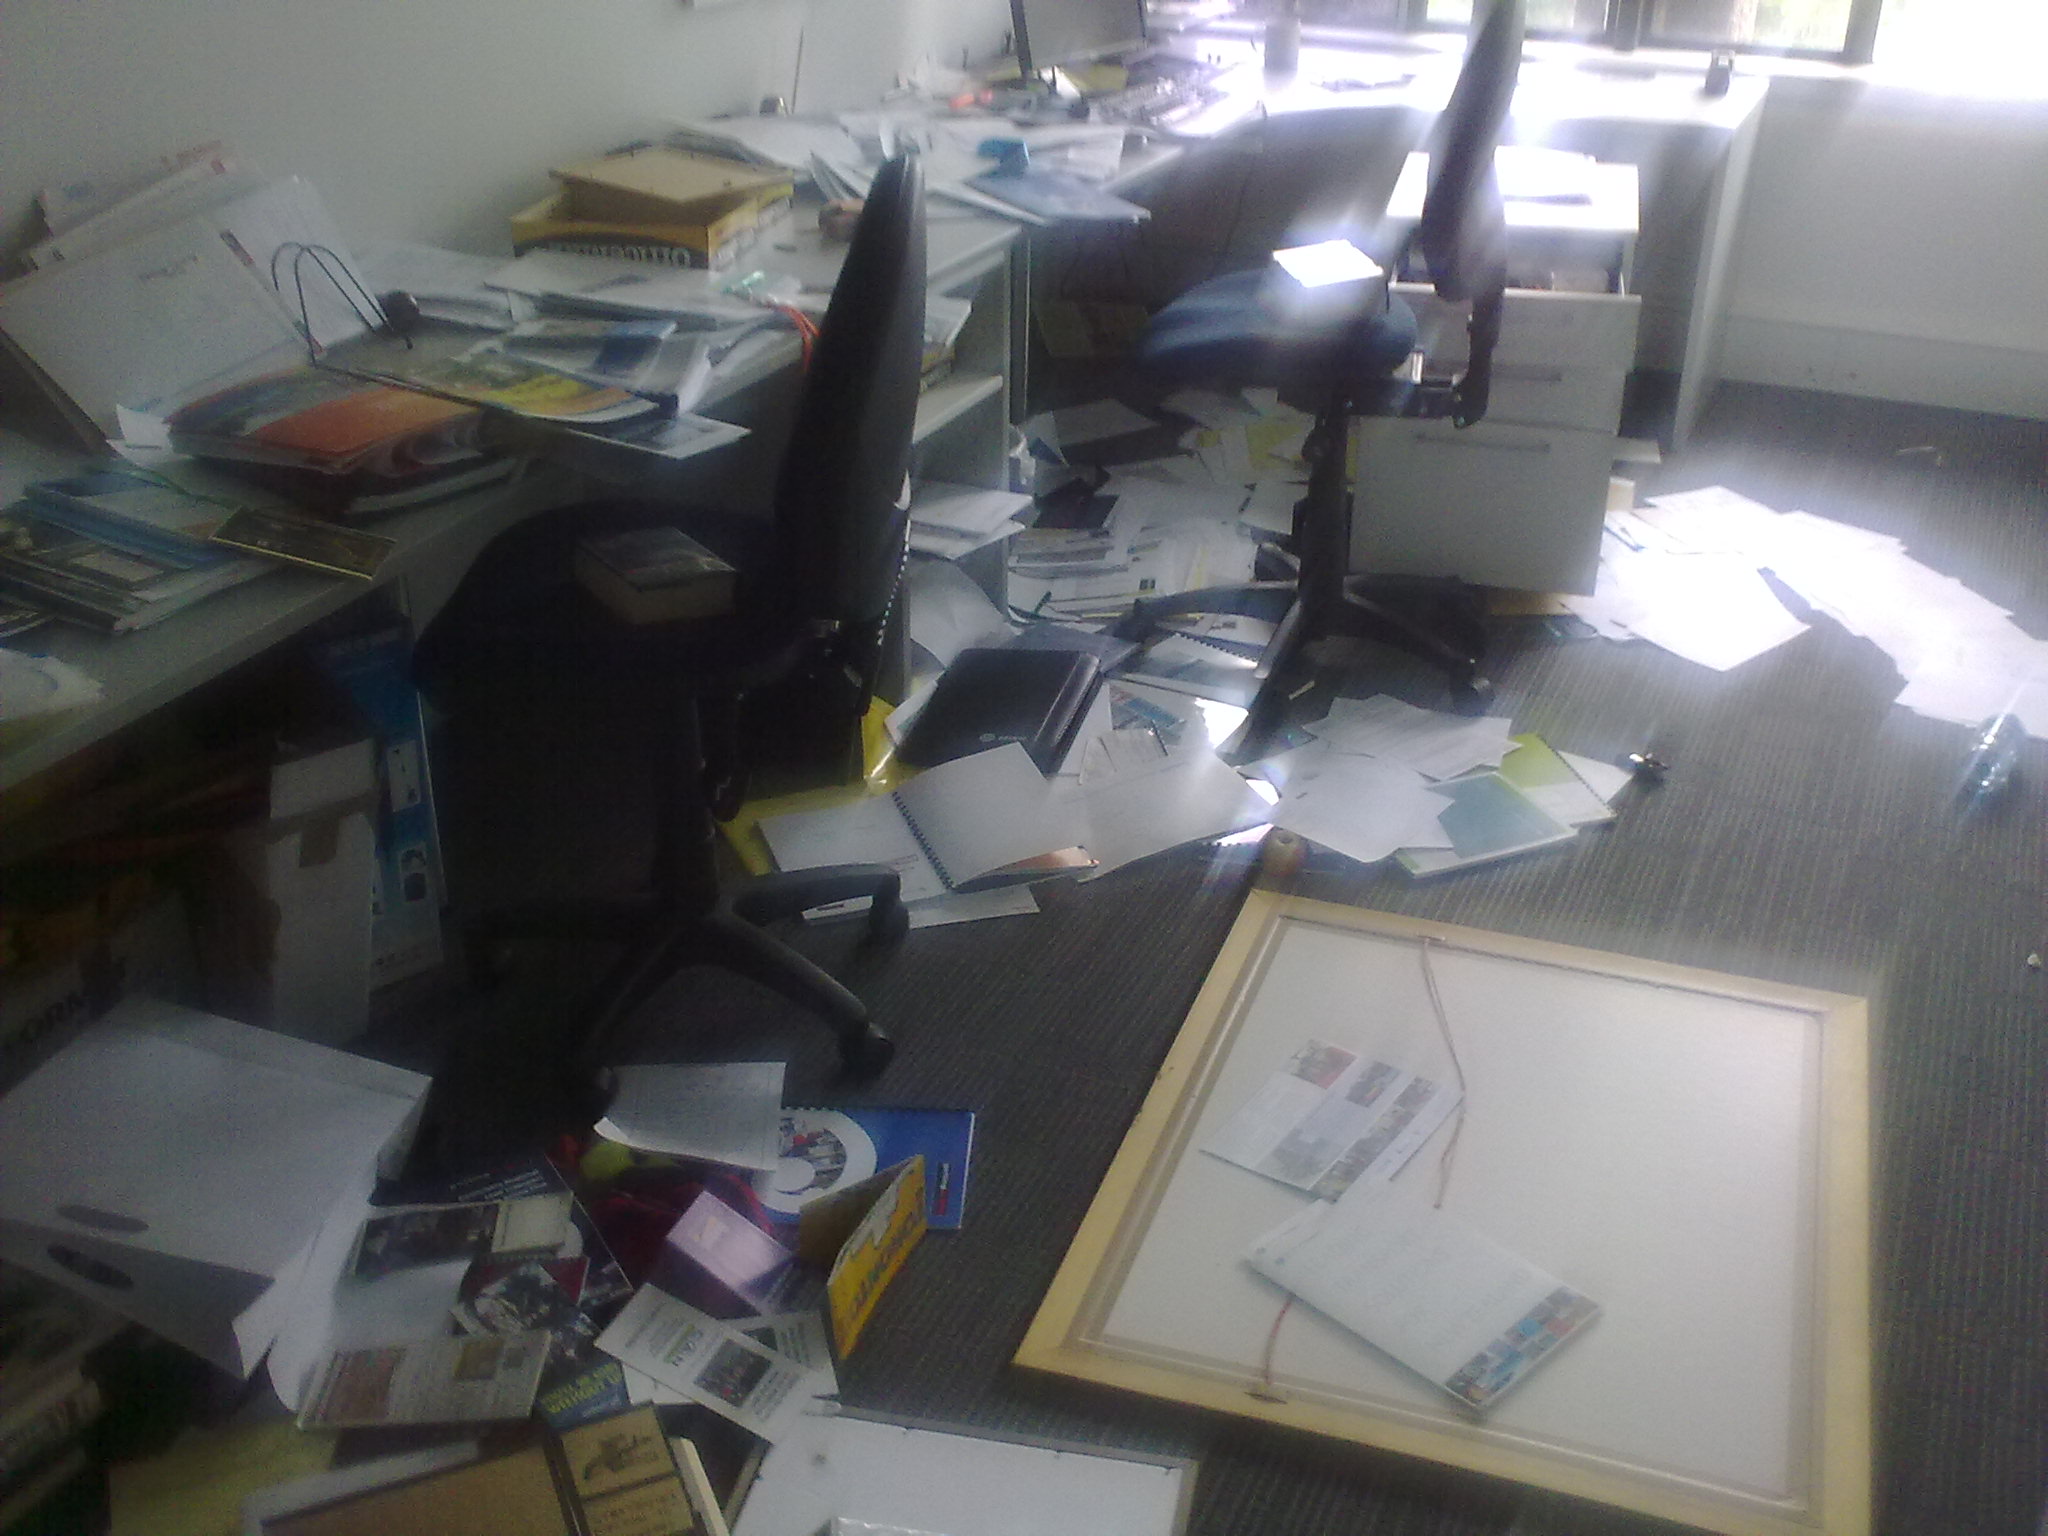 Our sixth floor office was quite a mess after the earthquake